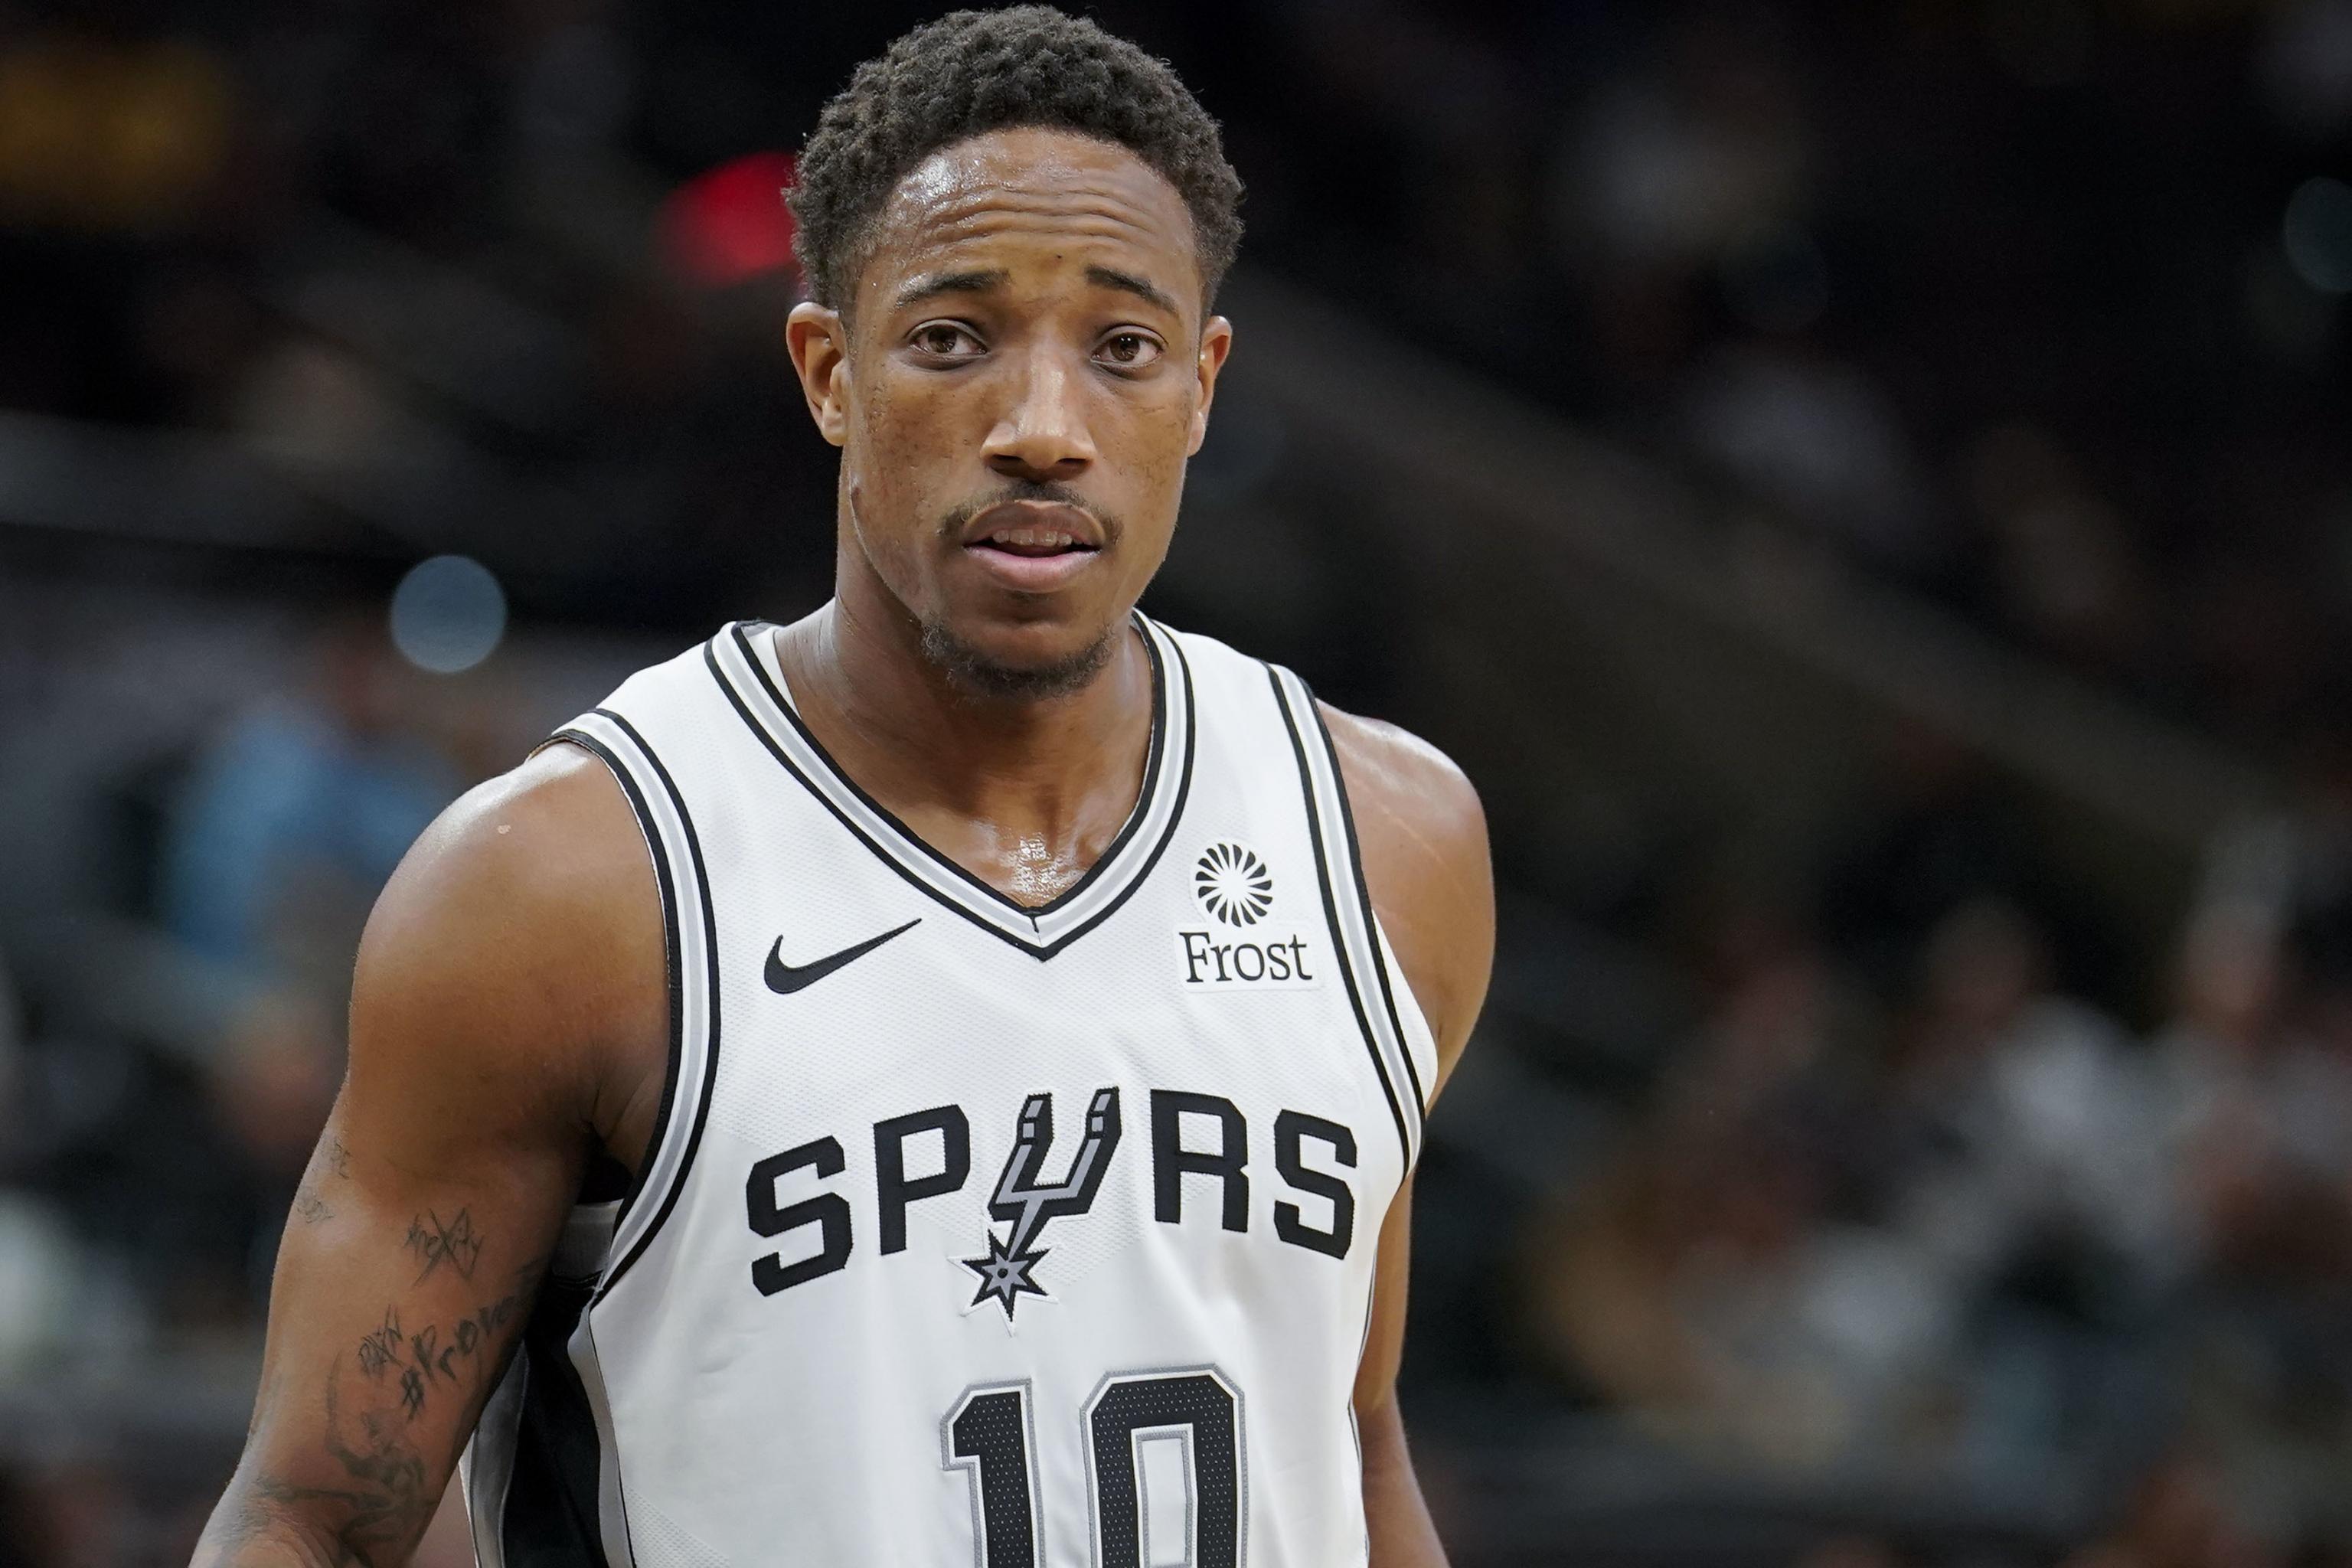 DeMar DeRozan Was 'Extremely Hurt' After Being Traded to Spurs